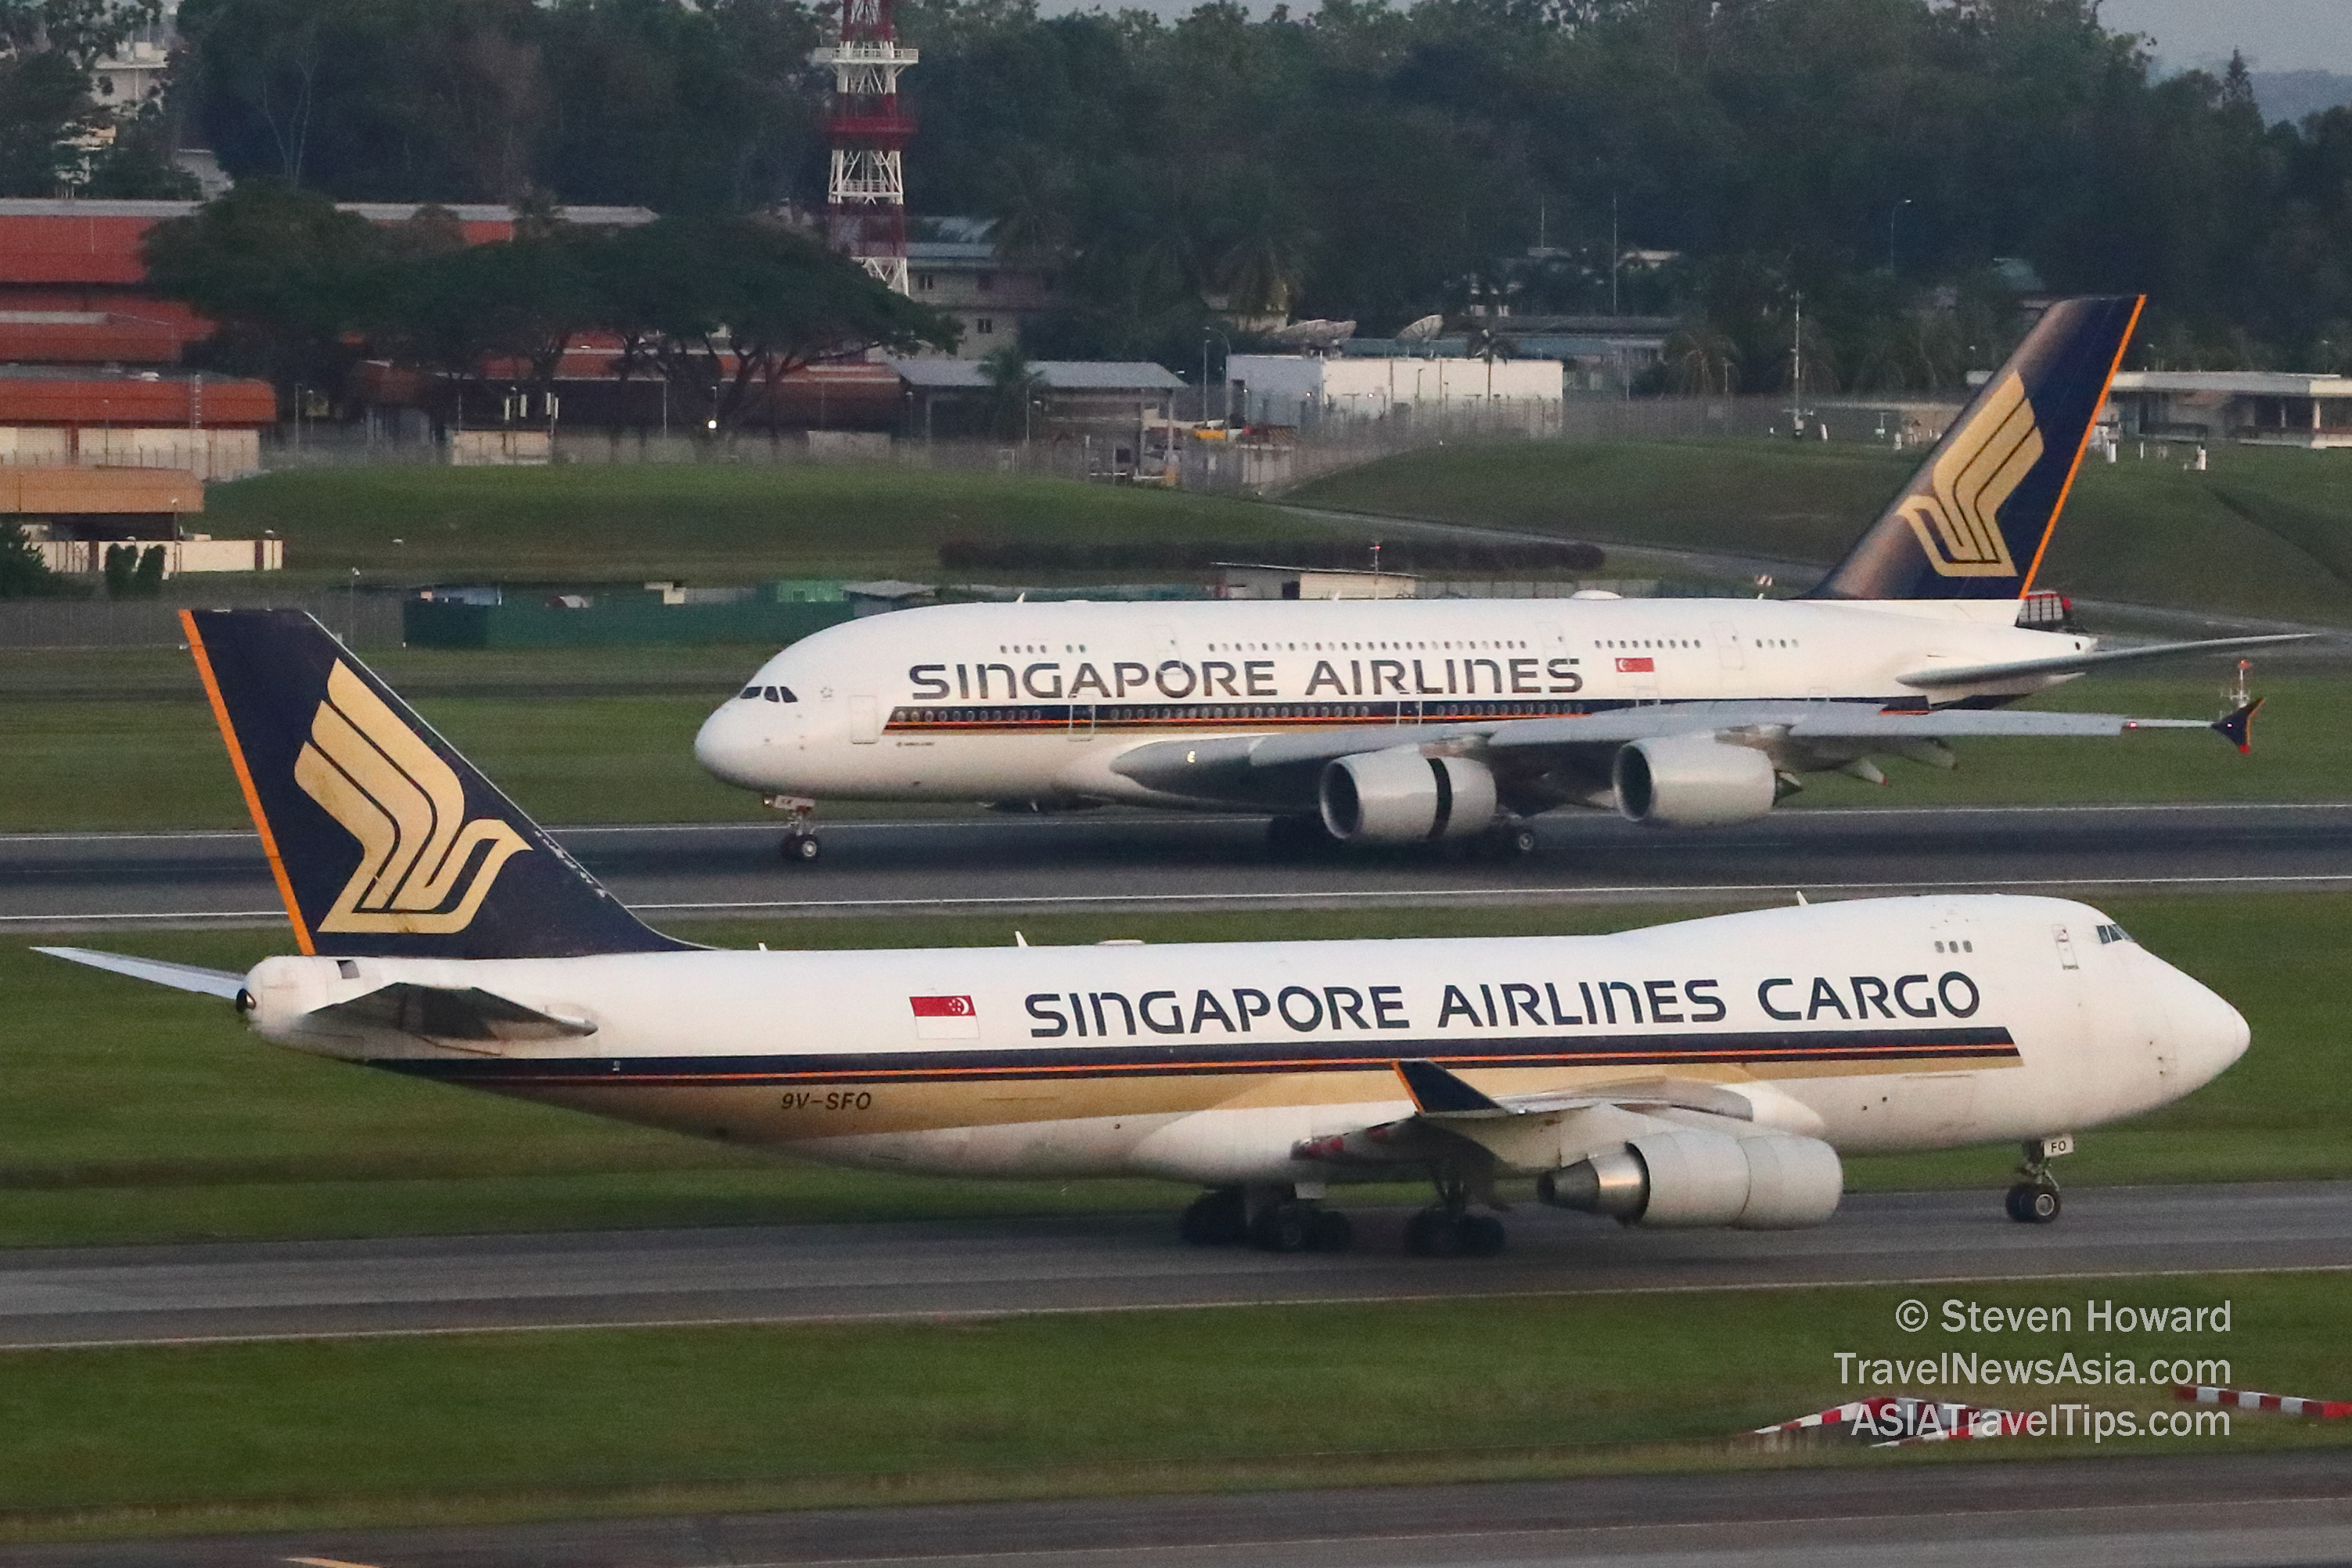 Singapore Airlines Airbus A380 and Boeing 747F at Changi Airport in Singapore. Picture taken by Steven Howard of TravelNewsAsia.com Click to enlarge.